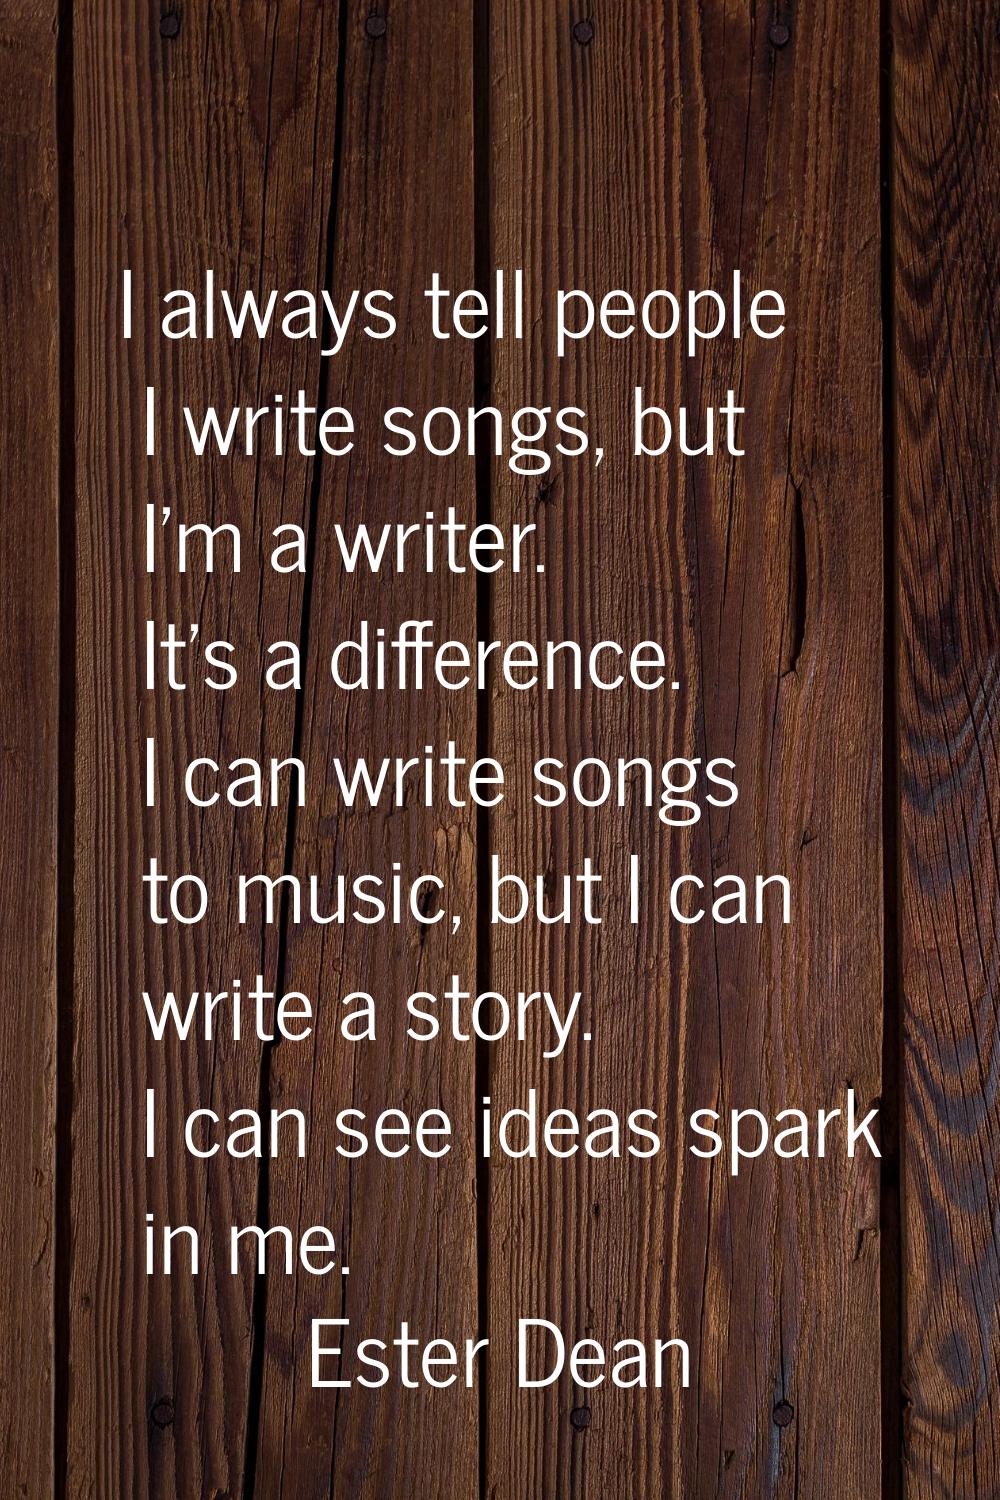 I always tell people I write songs, but I'm a writer. It's a difference. I can write songs to music